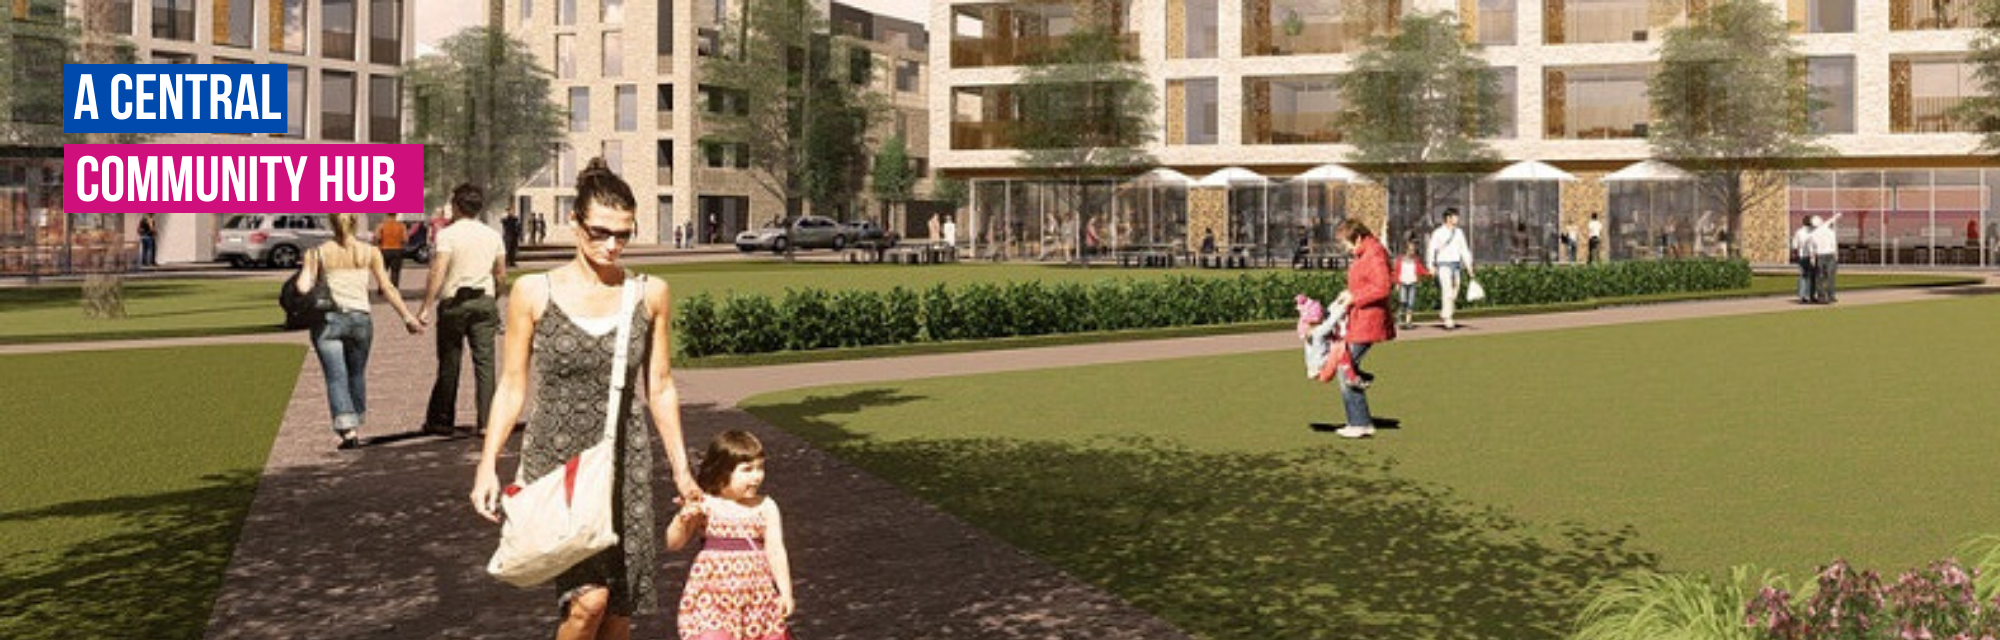 Artist's impression shows people walking and socialising on a green outside shops and apartment blocks.